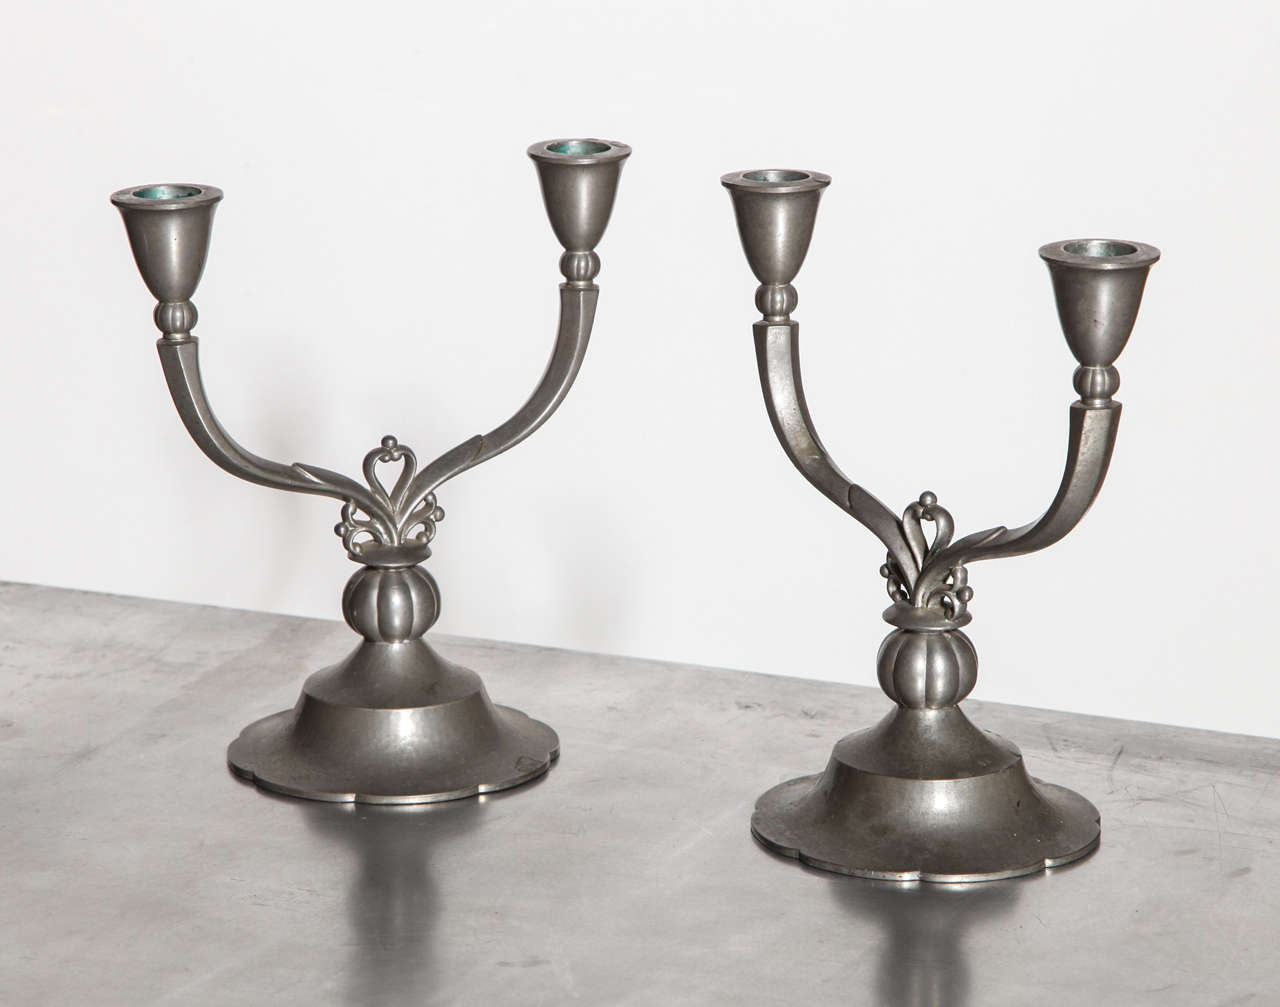 Pair of Just Andersen 6002 Two Arm Pewter Candlesticks, 1929.  Featuring Crest details in Satin Silver finish on circular scalloped base. Sculptural. Art Deco. Rarity. Signed JUST 1929 DENMARK 6002 